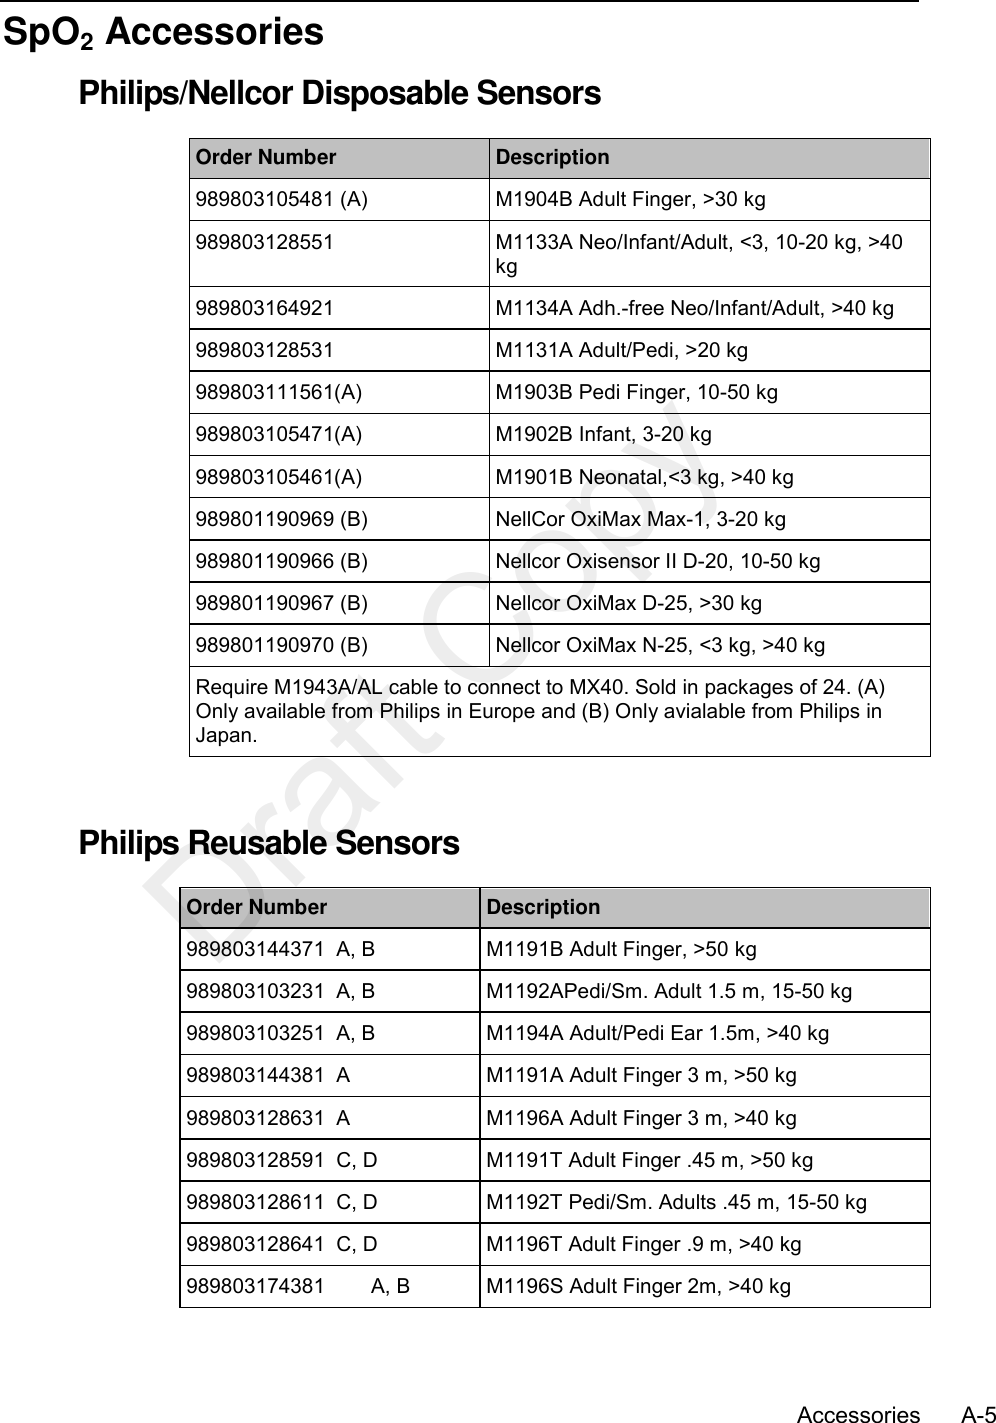      Accessories      A-5 SpO2 Accessories Philips/Nellcor Disposable Sensors Order Number Description 989803105481 (A) M1904B Adult Finger, &gt;30 kg 989803128551 M1133A Neo/Infant/Adult, &lt;3, 10-20 kg, &gt;40 kg 989803164921 M1134A Adh.-free Neo/Infant/Adult, &gt;40 kg 989803128531 M1131A Adult/Pedi, &gt;20 kg 989803111561(A) M1903B Pedi Finger, 10-50 kg 989803105471(A) M1902B Infant, 3-20 kg 989803105461(A) M1901B Neonatal,&lt;3 kg, &gt;40 kg   989801190969 (B) NellCor OxiMax Max-1, 3-20 kg 989801190966 (B) Nellcor Oxisensor II D-20, 10-50 kg 989801190967 (B) Nellcor OxiMax D-25, &gt;30 kg 989801190970 (B) Nellcor OxiMax N-25, &lt;3 kg, &gt;40 kg Require M1943A/AL cable to connect to MX40. Sold in packages of 24. (A) Only available from Philips in Europe and (B) Only avialable from Philips in Japan.   Philips Reusable Sensors Order Number Description 989803144371  A, B M1191B Adult Finger, &gt;50 kg 989803103231  A, B M1192APedi/Sm. Adult 1.5 m, 15-50 kg 989803103251   A, B M1194A Adult/Pedi Ear 1.5m, &gt;40 kg 989803144381  A M1191A Adult Finger 3 m, &gt;50 kg 989803128631  A M1196A Adult Finger 3 m, &gt;40 kg 989803128591  C, D M1191T Adult Finger .45 m, &gt;50 kg 989803128611  C, D M1192T Pedi/Sm. Adults .45 m, 15-50 kg 989803128641  C, D M1196T Adult Finger .9 m, &gt;40 kg 989803174381          A, B M1196S Adult Finger 2m, &gt;40 kg Draft Copy